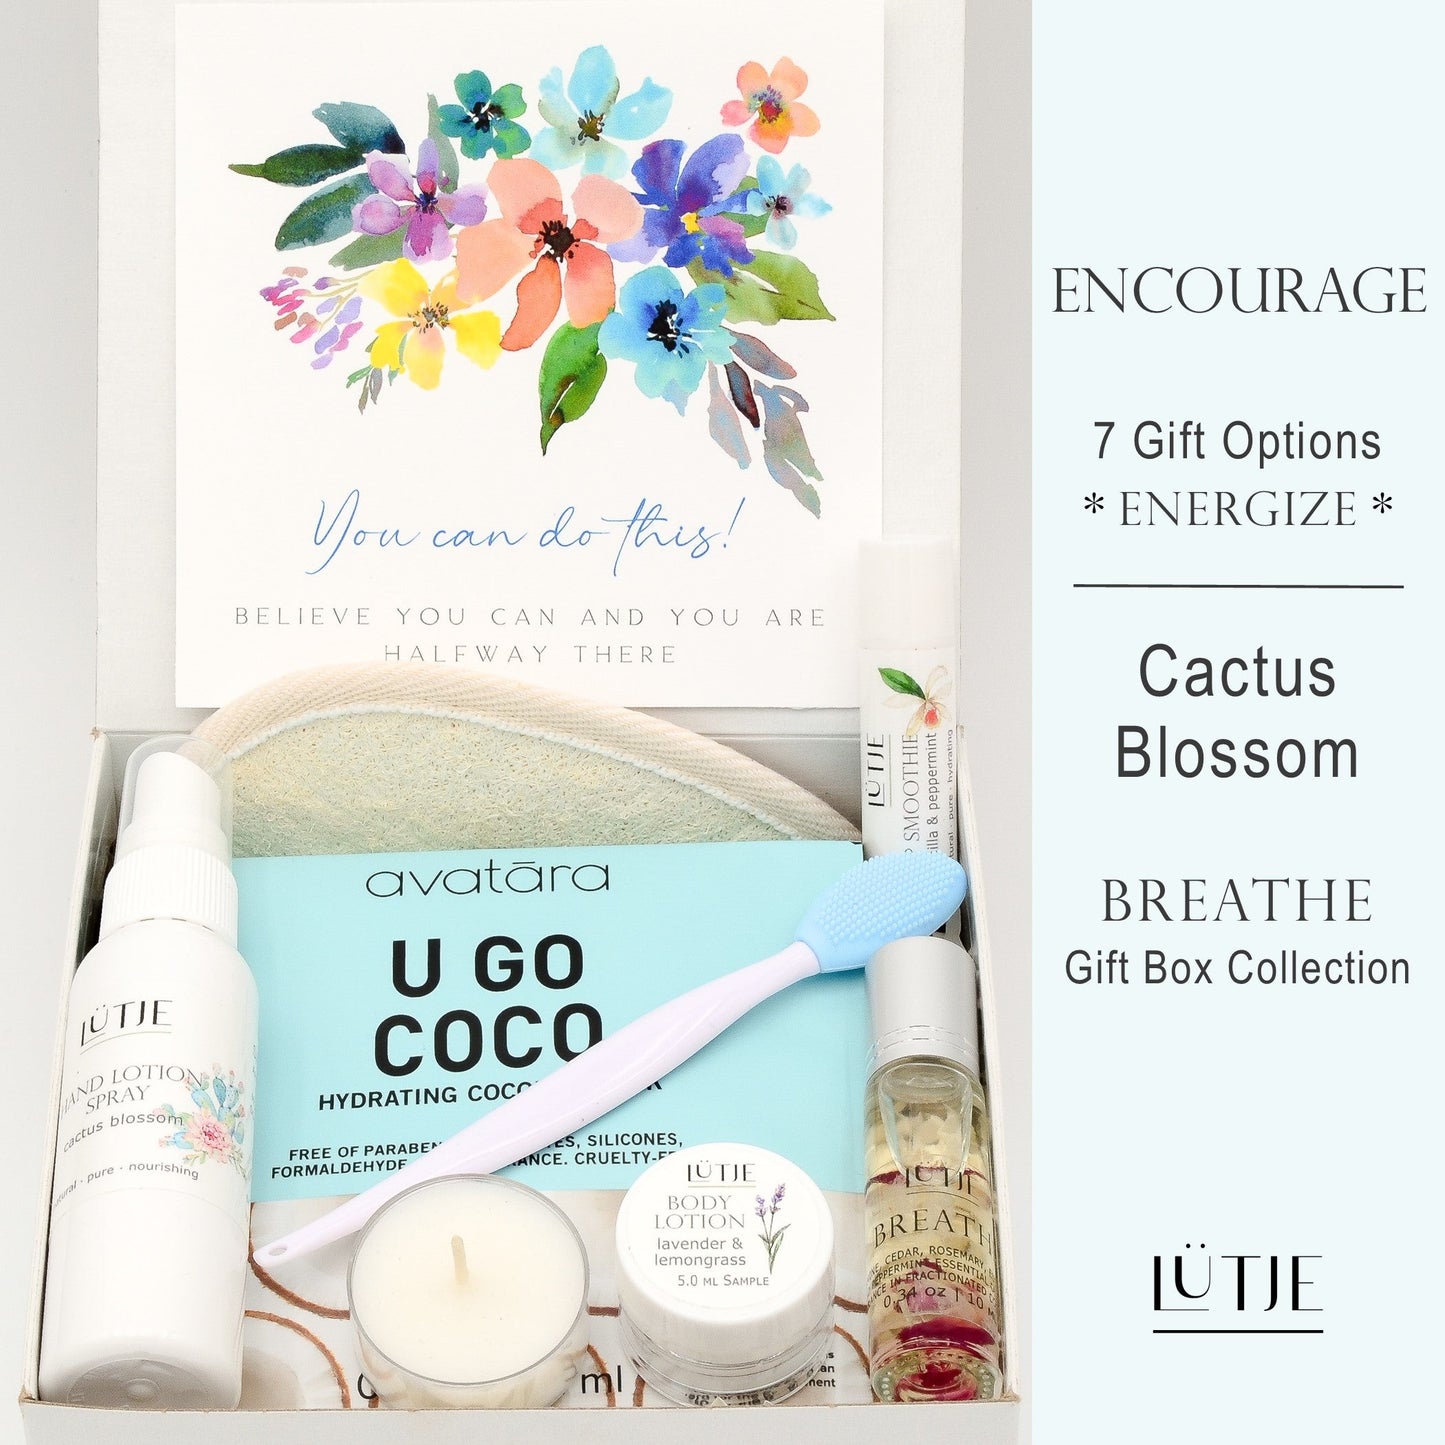 Gift Box for women, wife, daughter, BFF, sister, mom, or grandma, includes Cactus Blossom hand lotion spray and body lotion, essential oil, lip balm, soothing muscle balm, Lavender & Chamomile room & linen spray, French soap, French bath salts, hydrating face mask, other bath, spa and self-care items, and 18K gold-plated necklace with engraved heart.